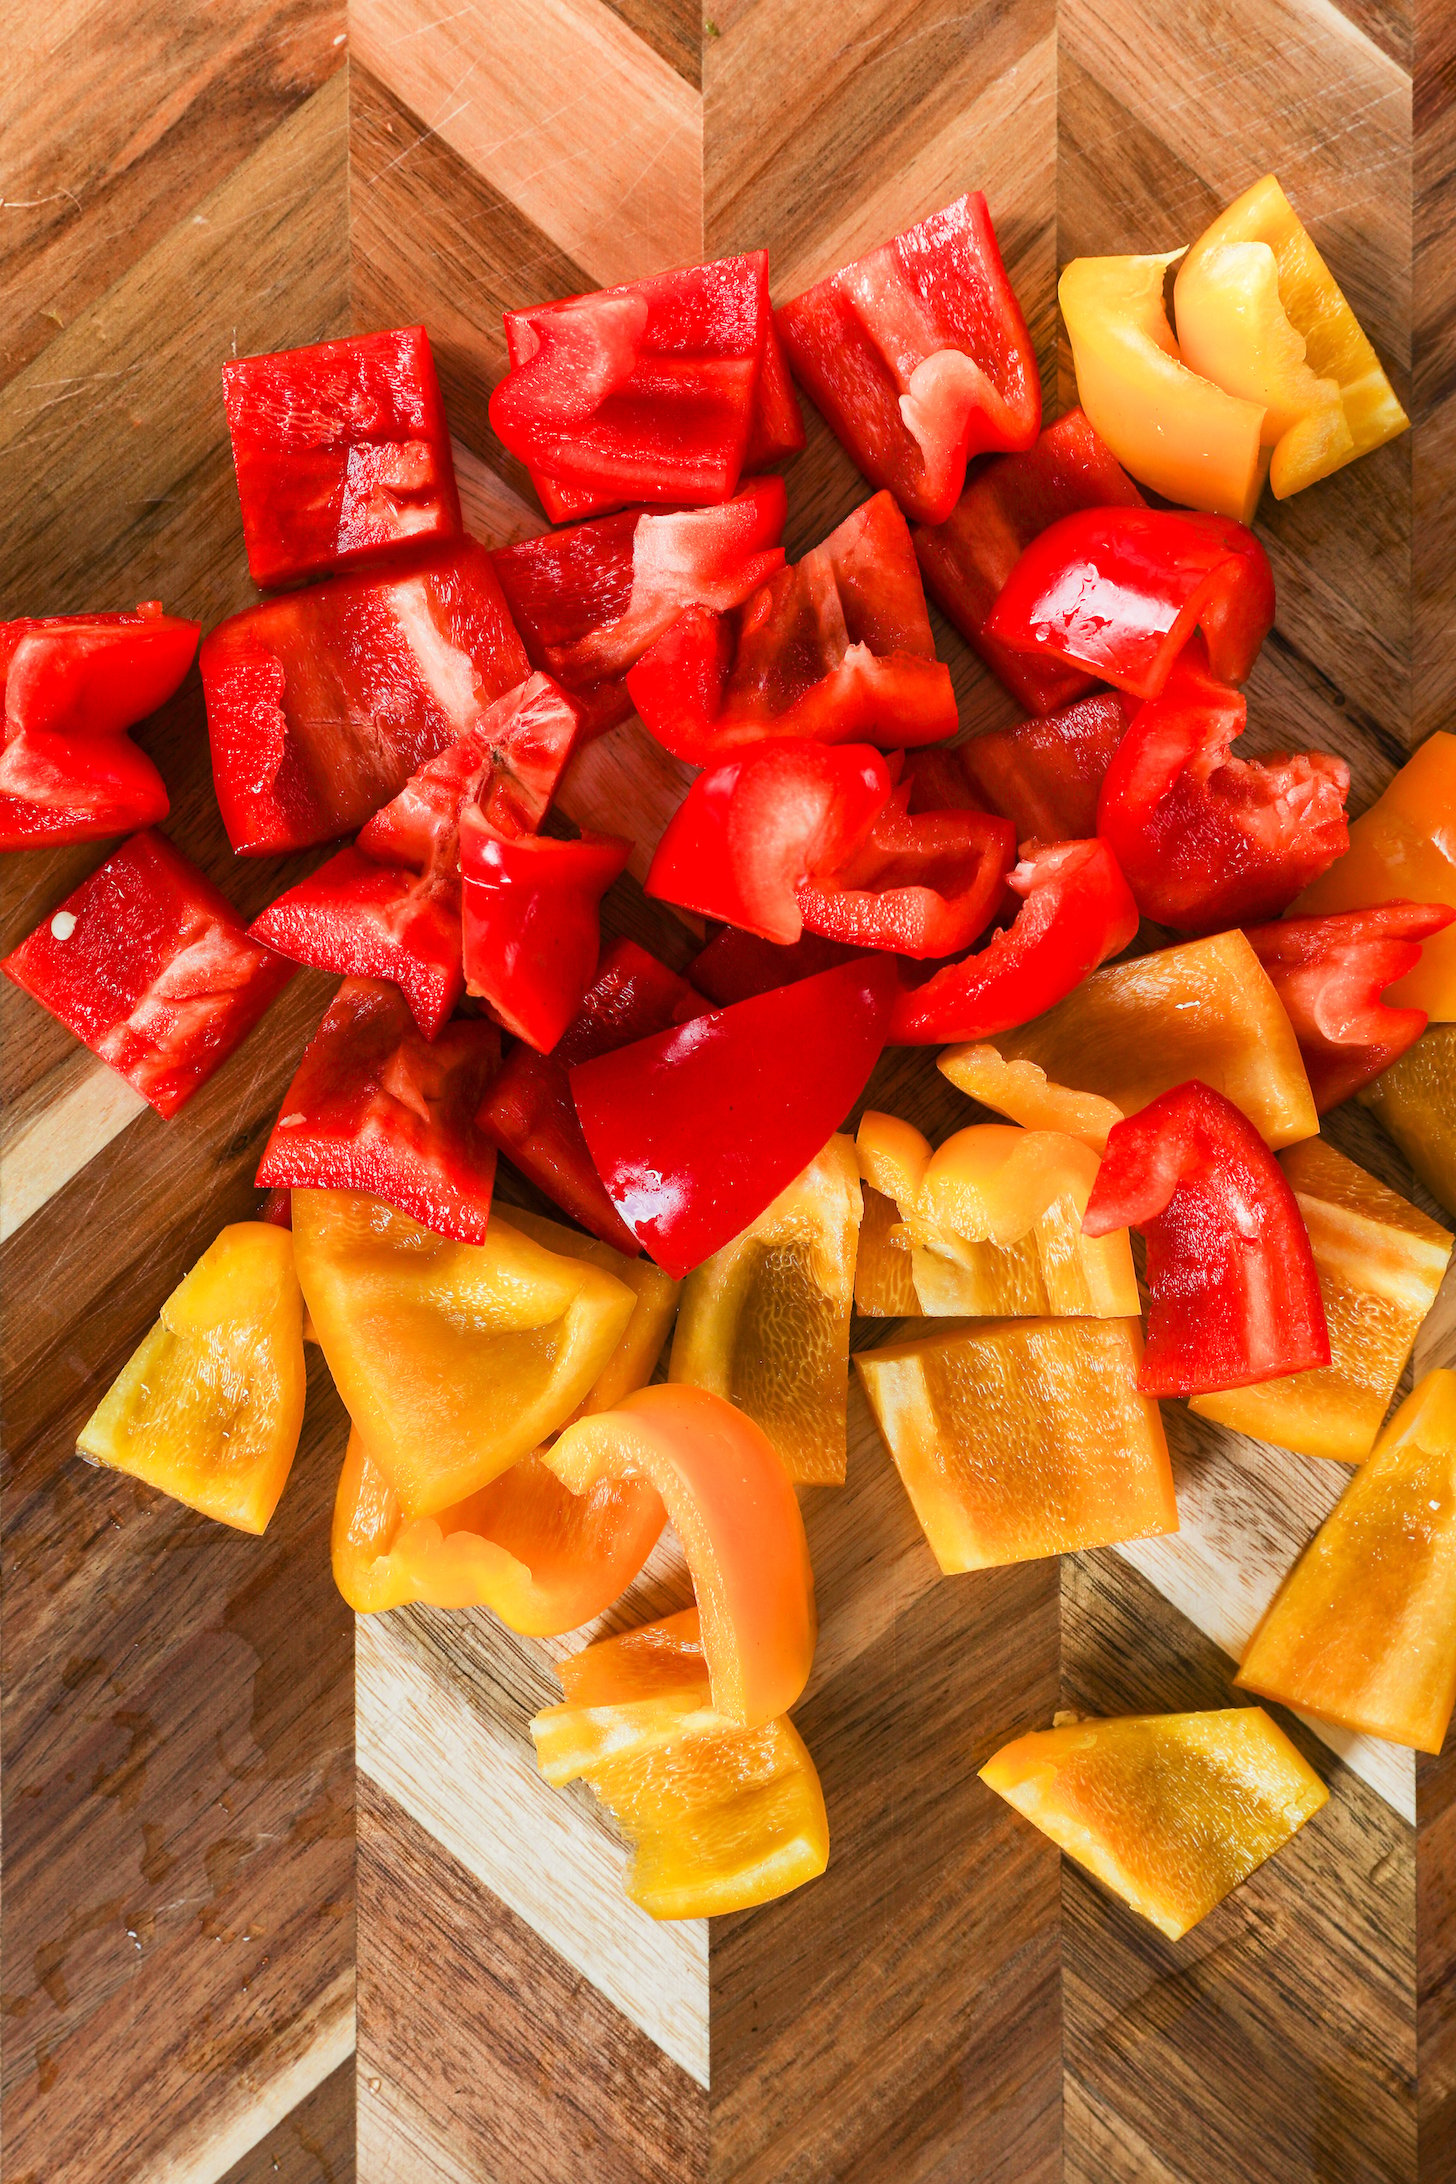 A collection of medium-sized, chopped yellow and red peppers placed on a chopping board.